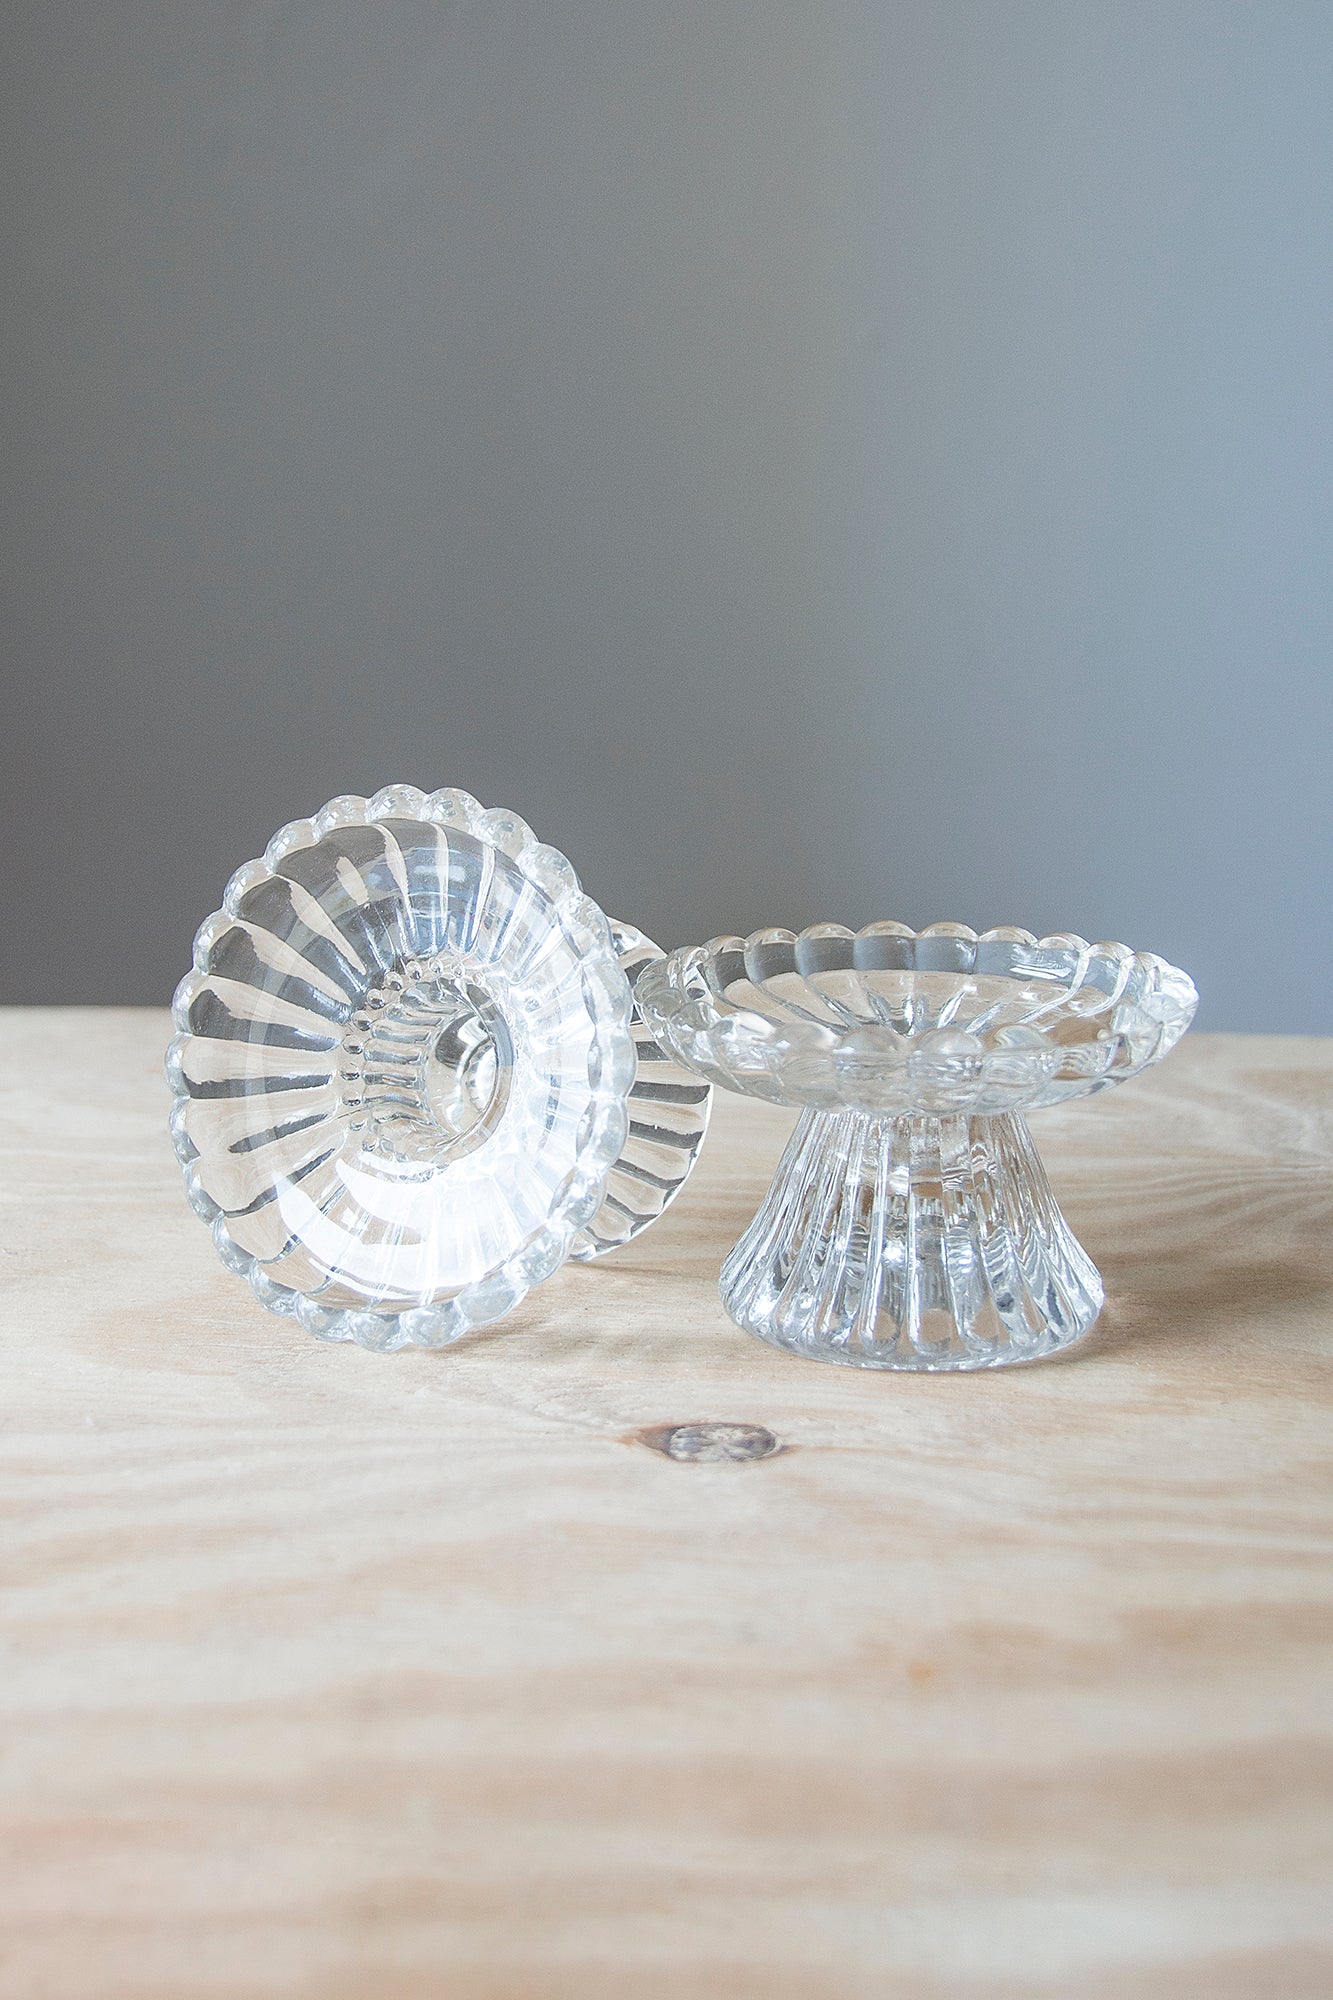 Twin Crystal Candle Holders